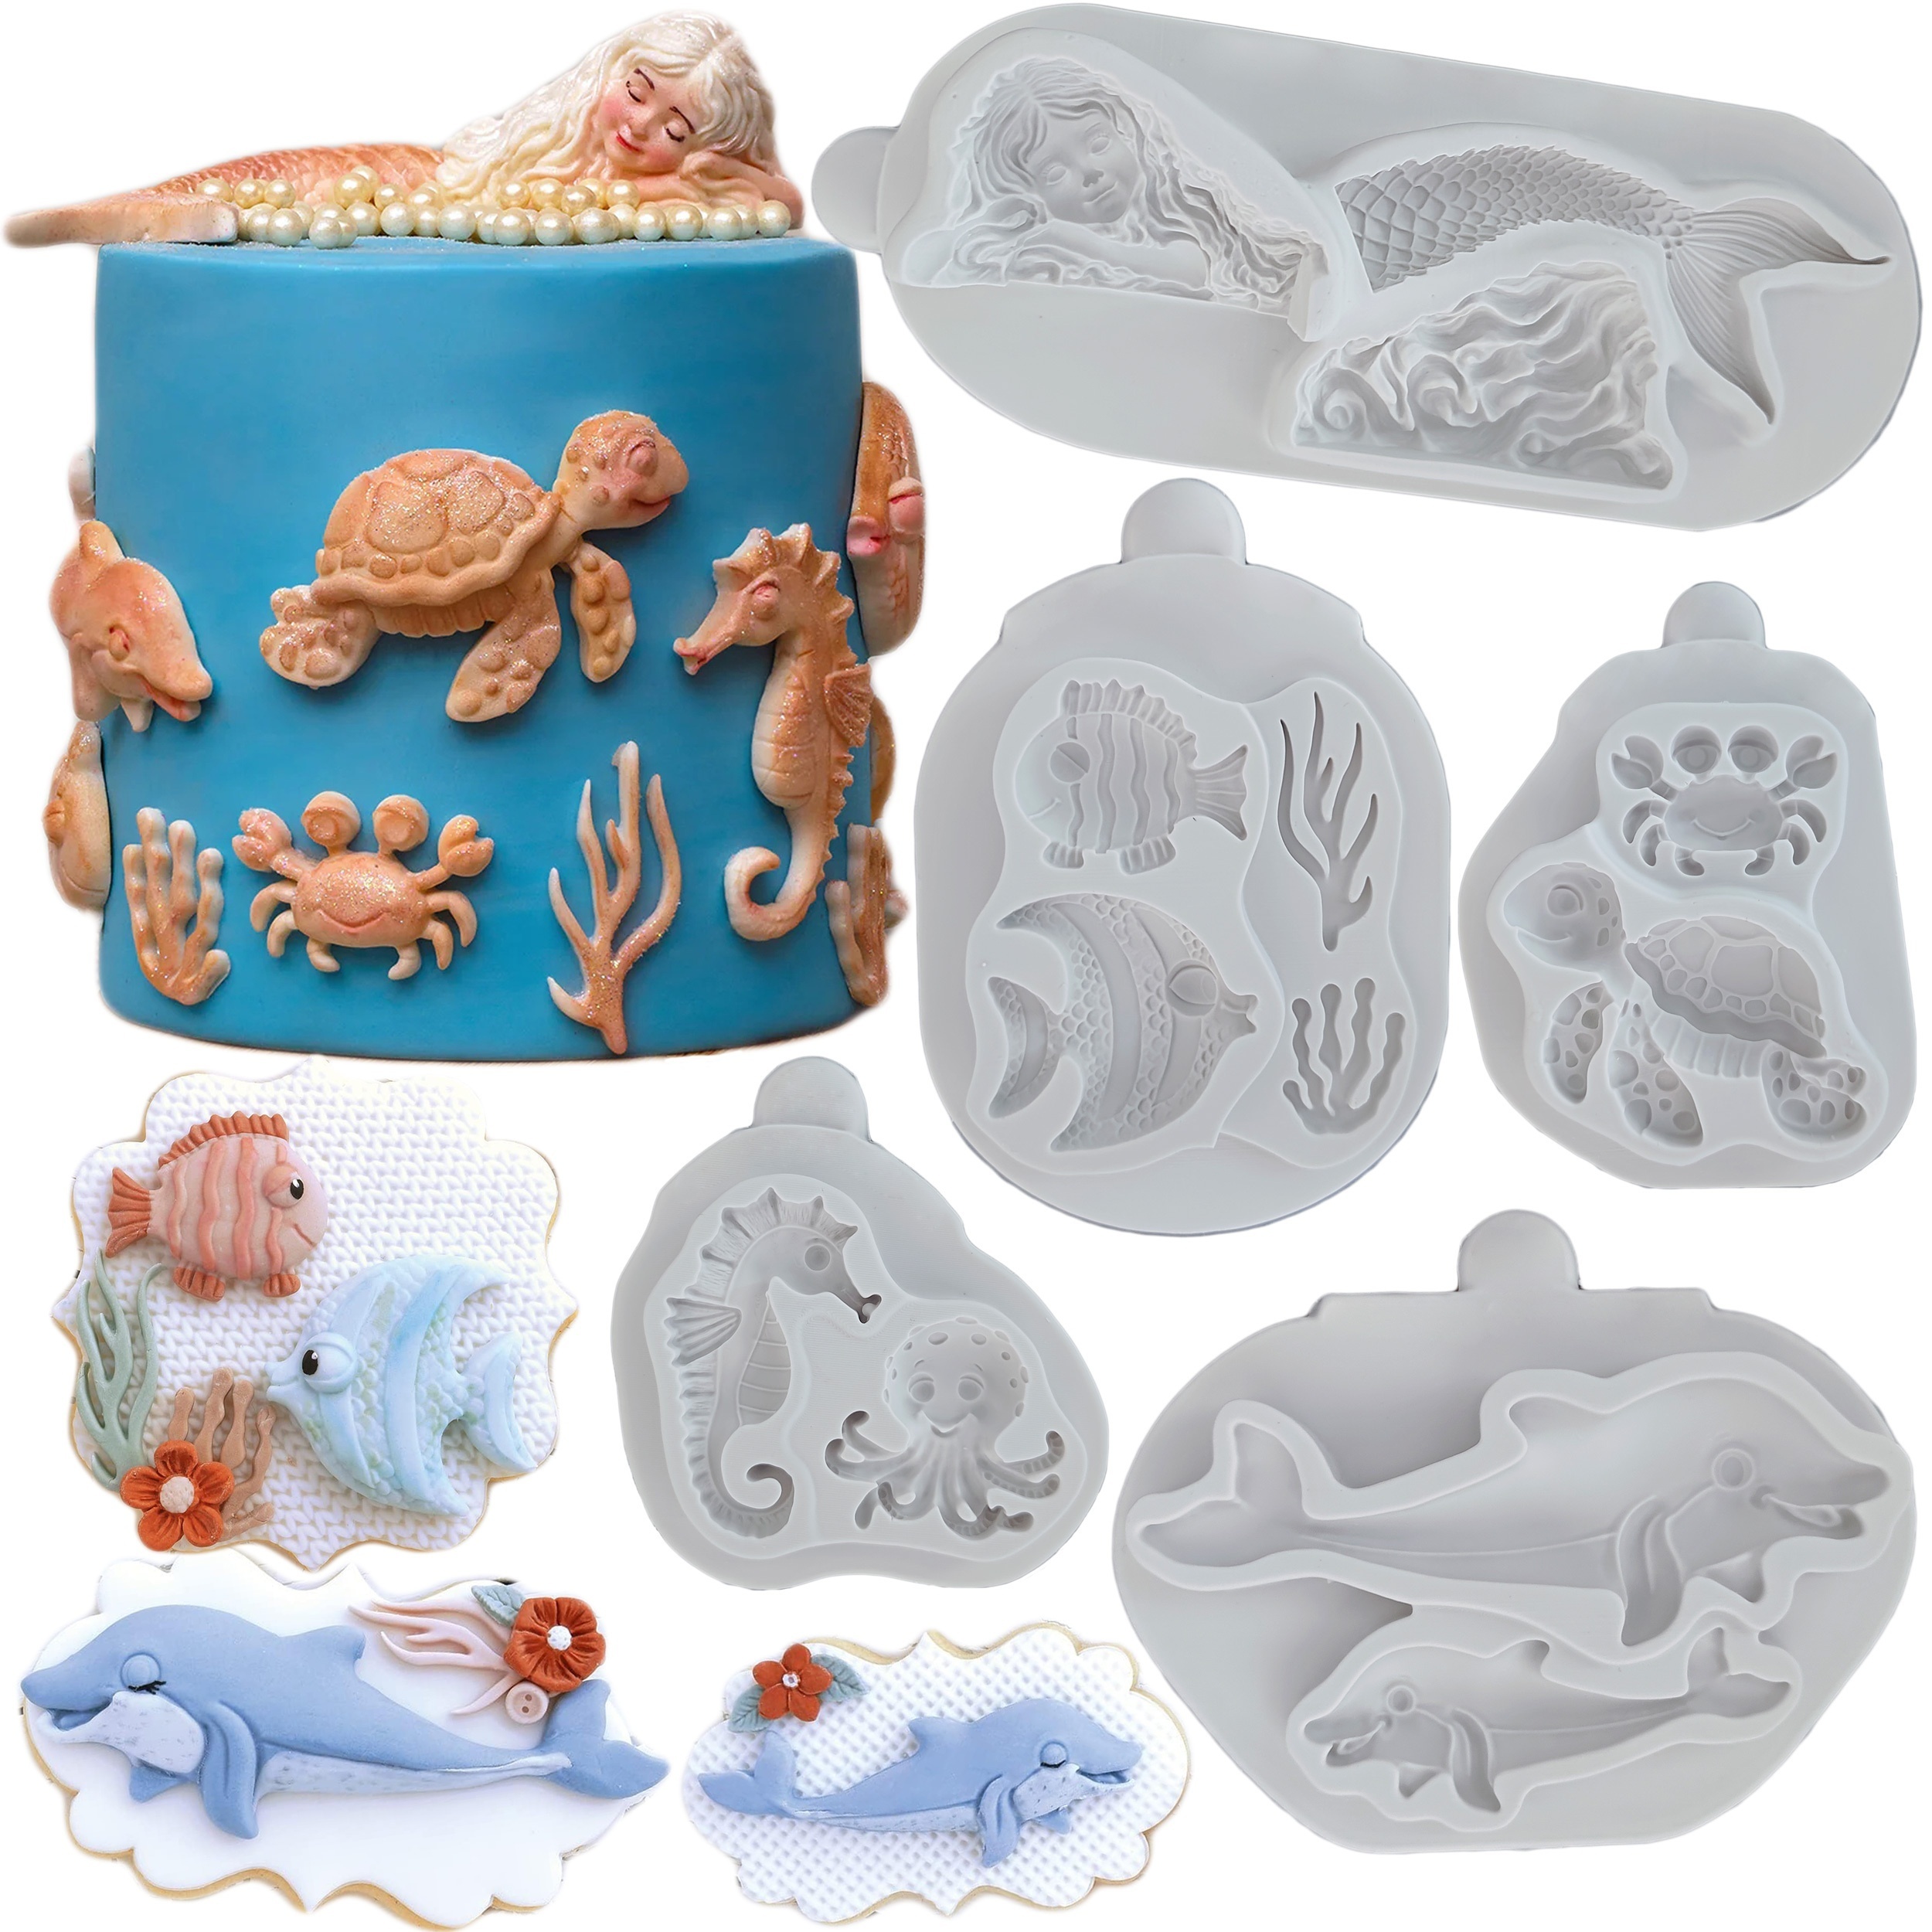 Deliciously Decorate Your Treats With This Chocolate Silicone Mold! - Temu